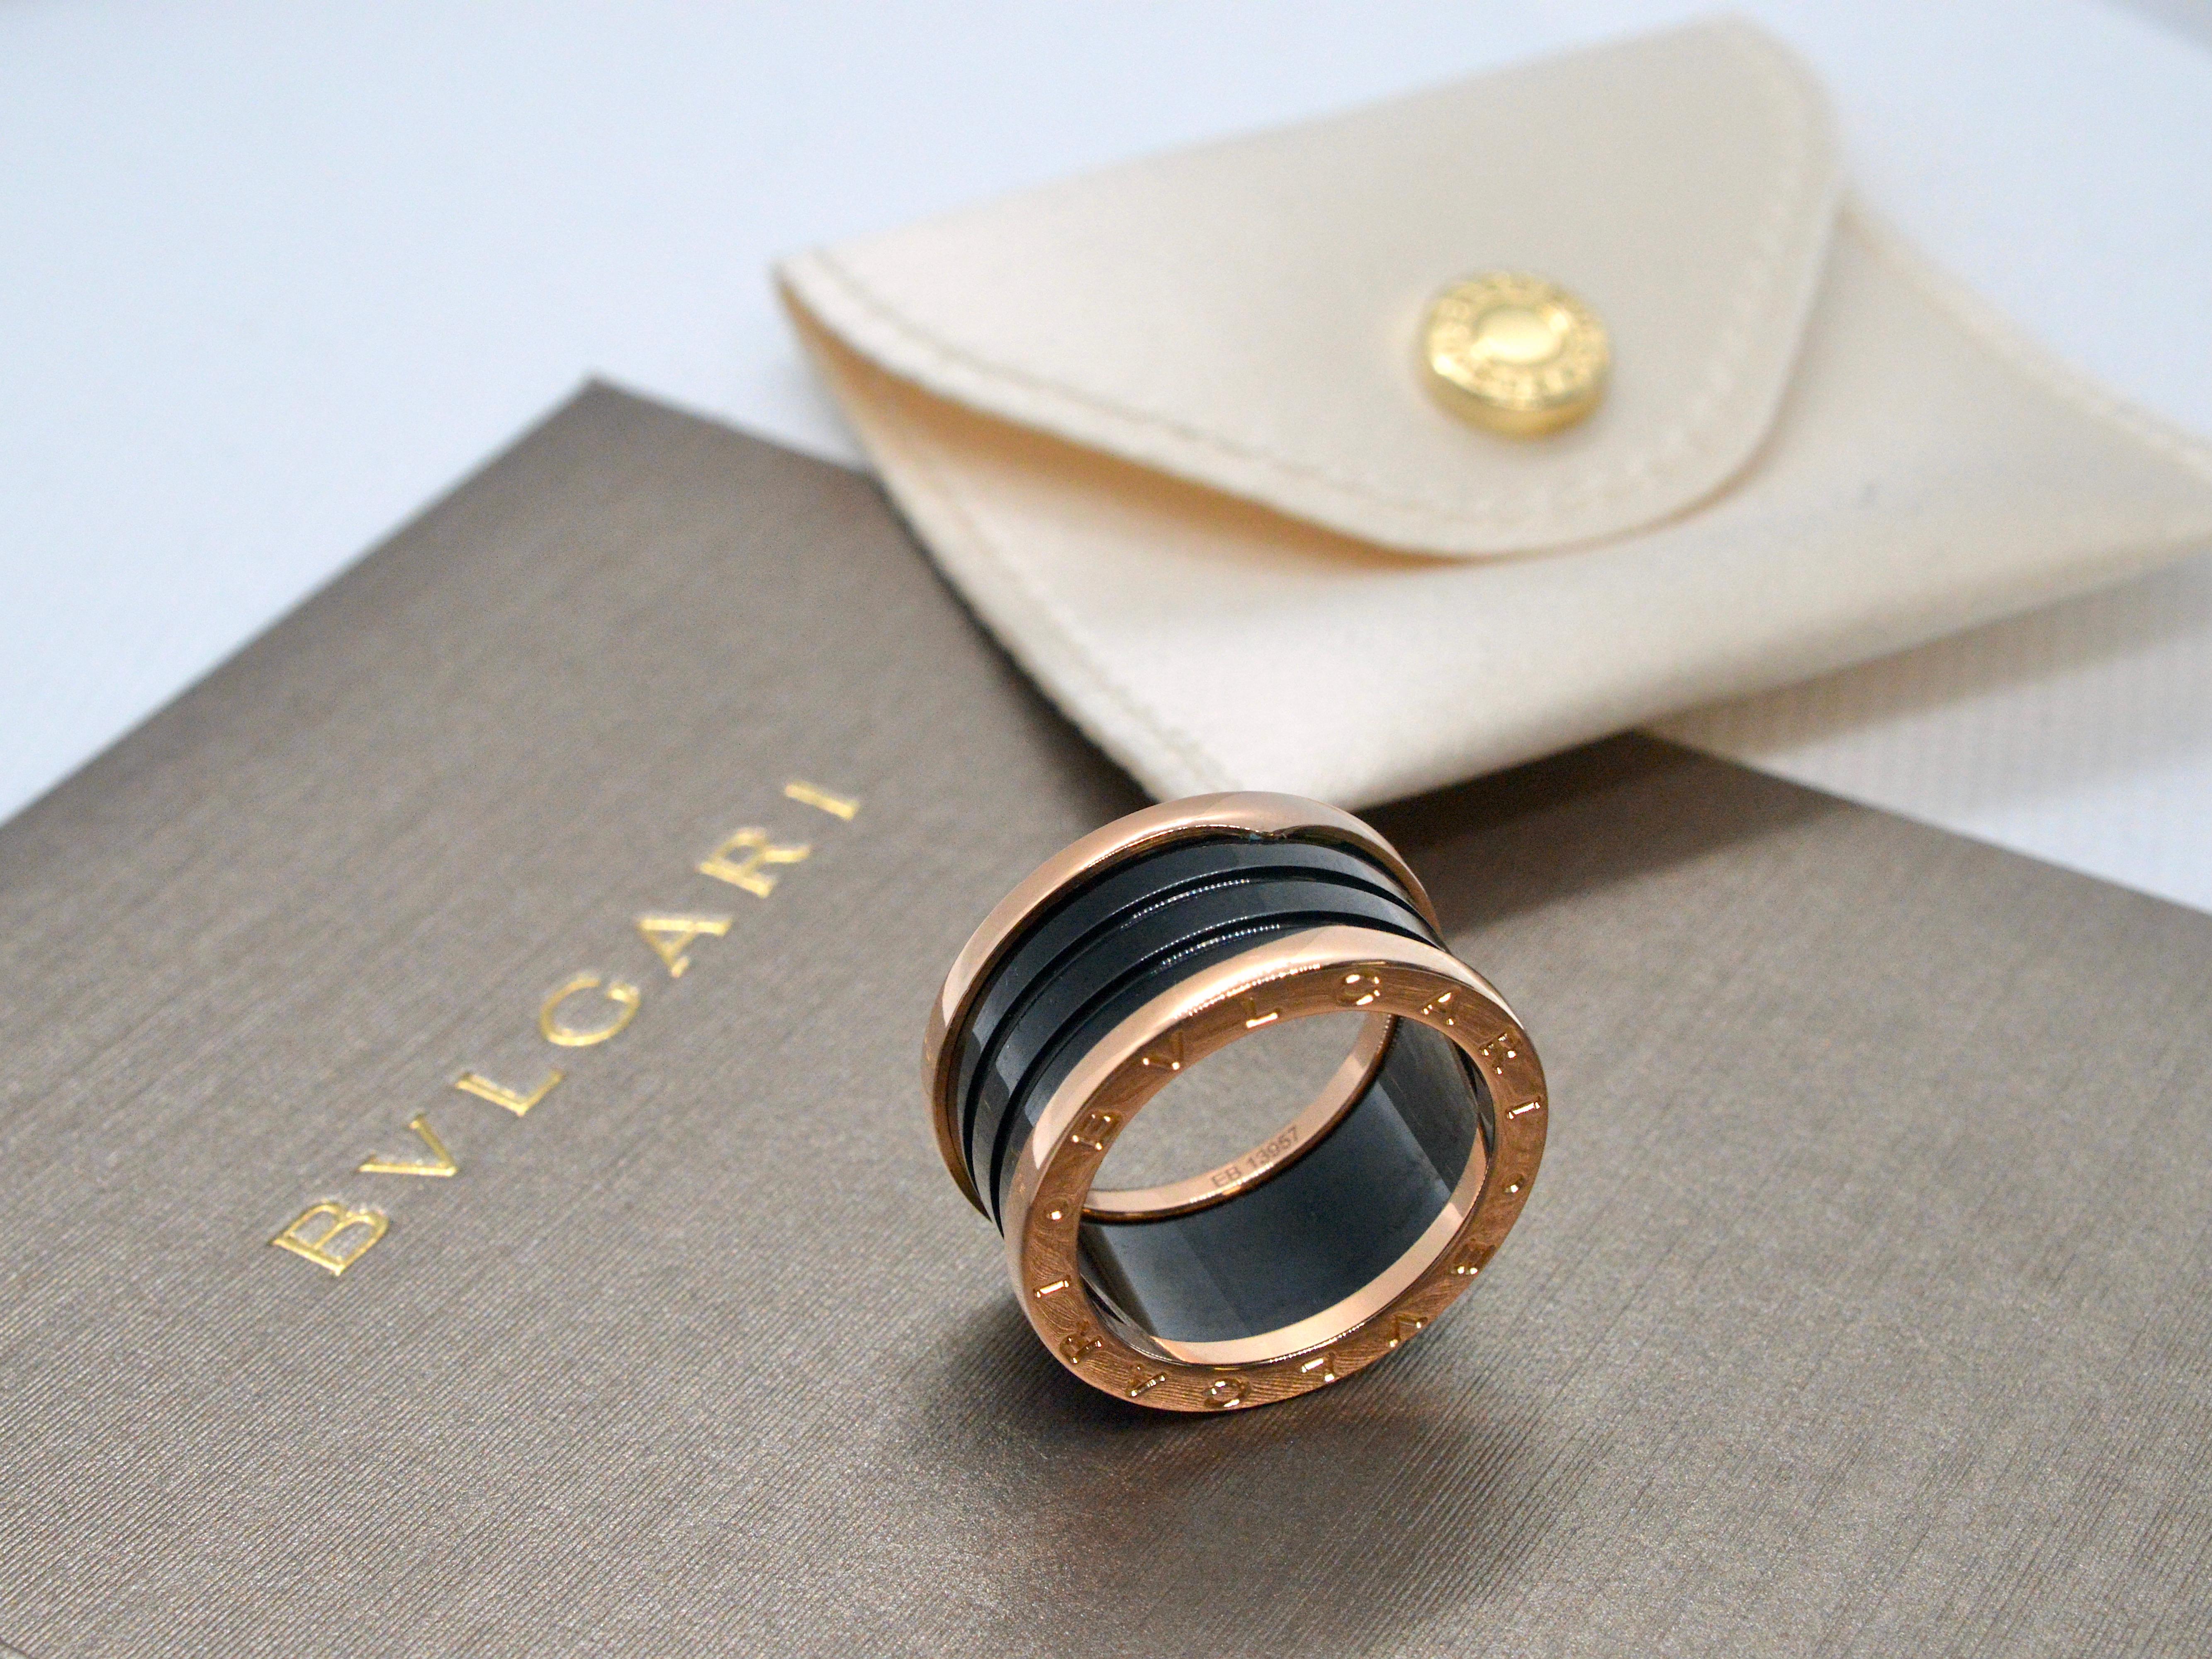 Indulge in the luxurious allure of this BVLGARI B.ZERO1 black ceramic and rose gold ring. With its bold and distinctive design, it's a testament to BVLGARI's craftsmanship and style. This exquisite ring weighs 10.4 grams and is custom-sized to a